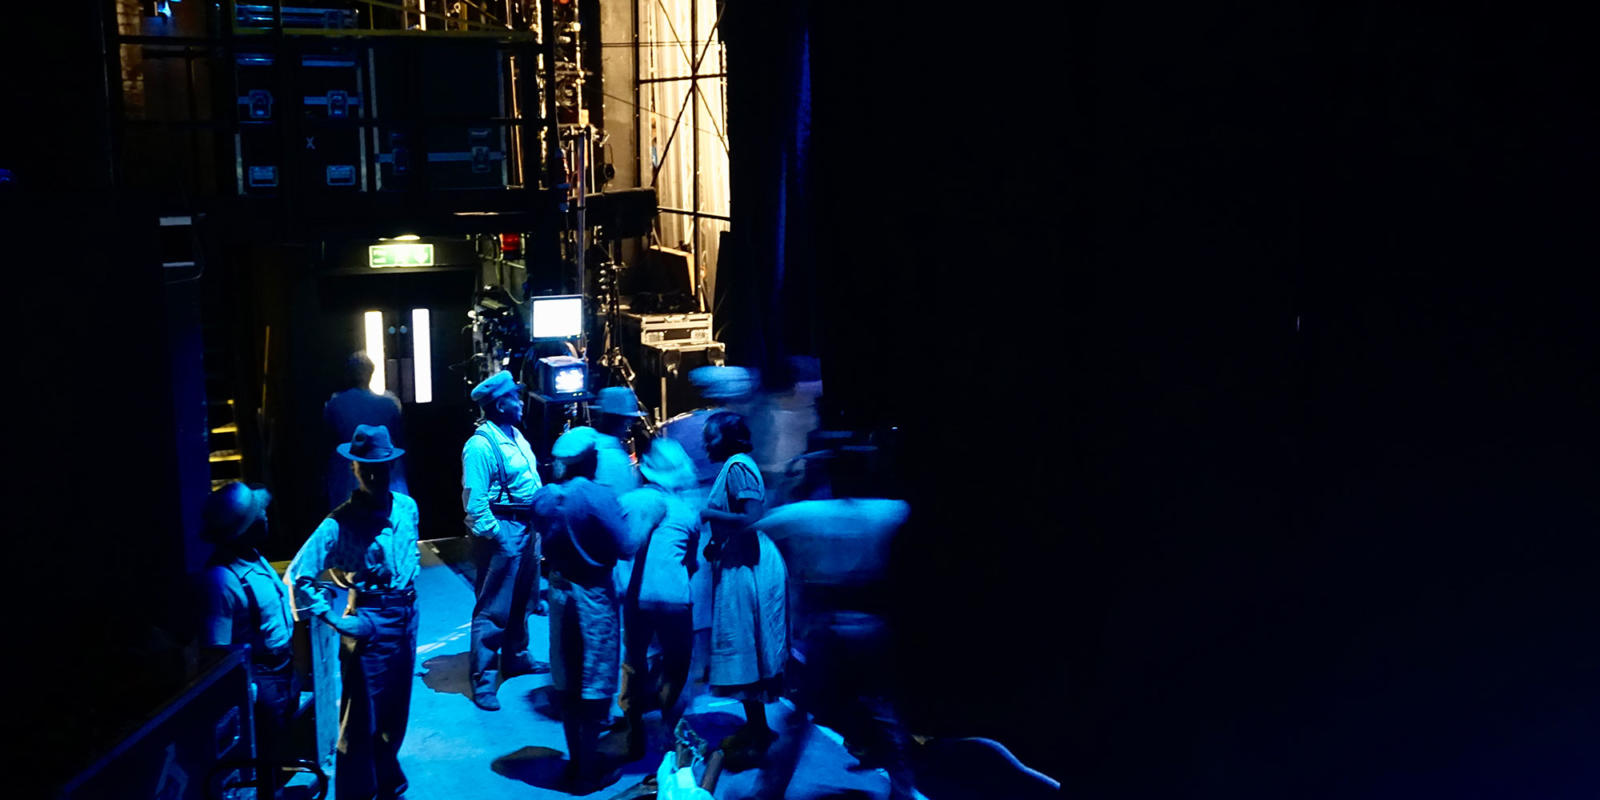 ENO Porgy and Bess: Members of the ensemble wait in the wings